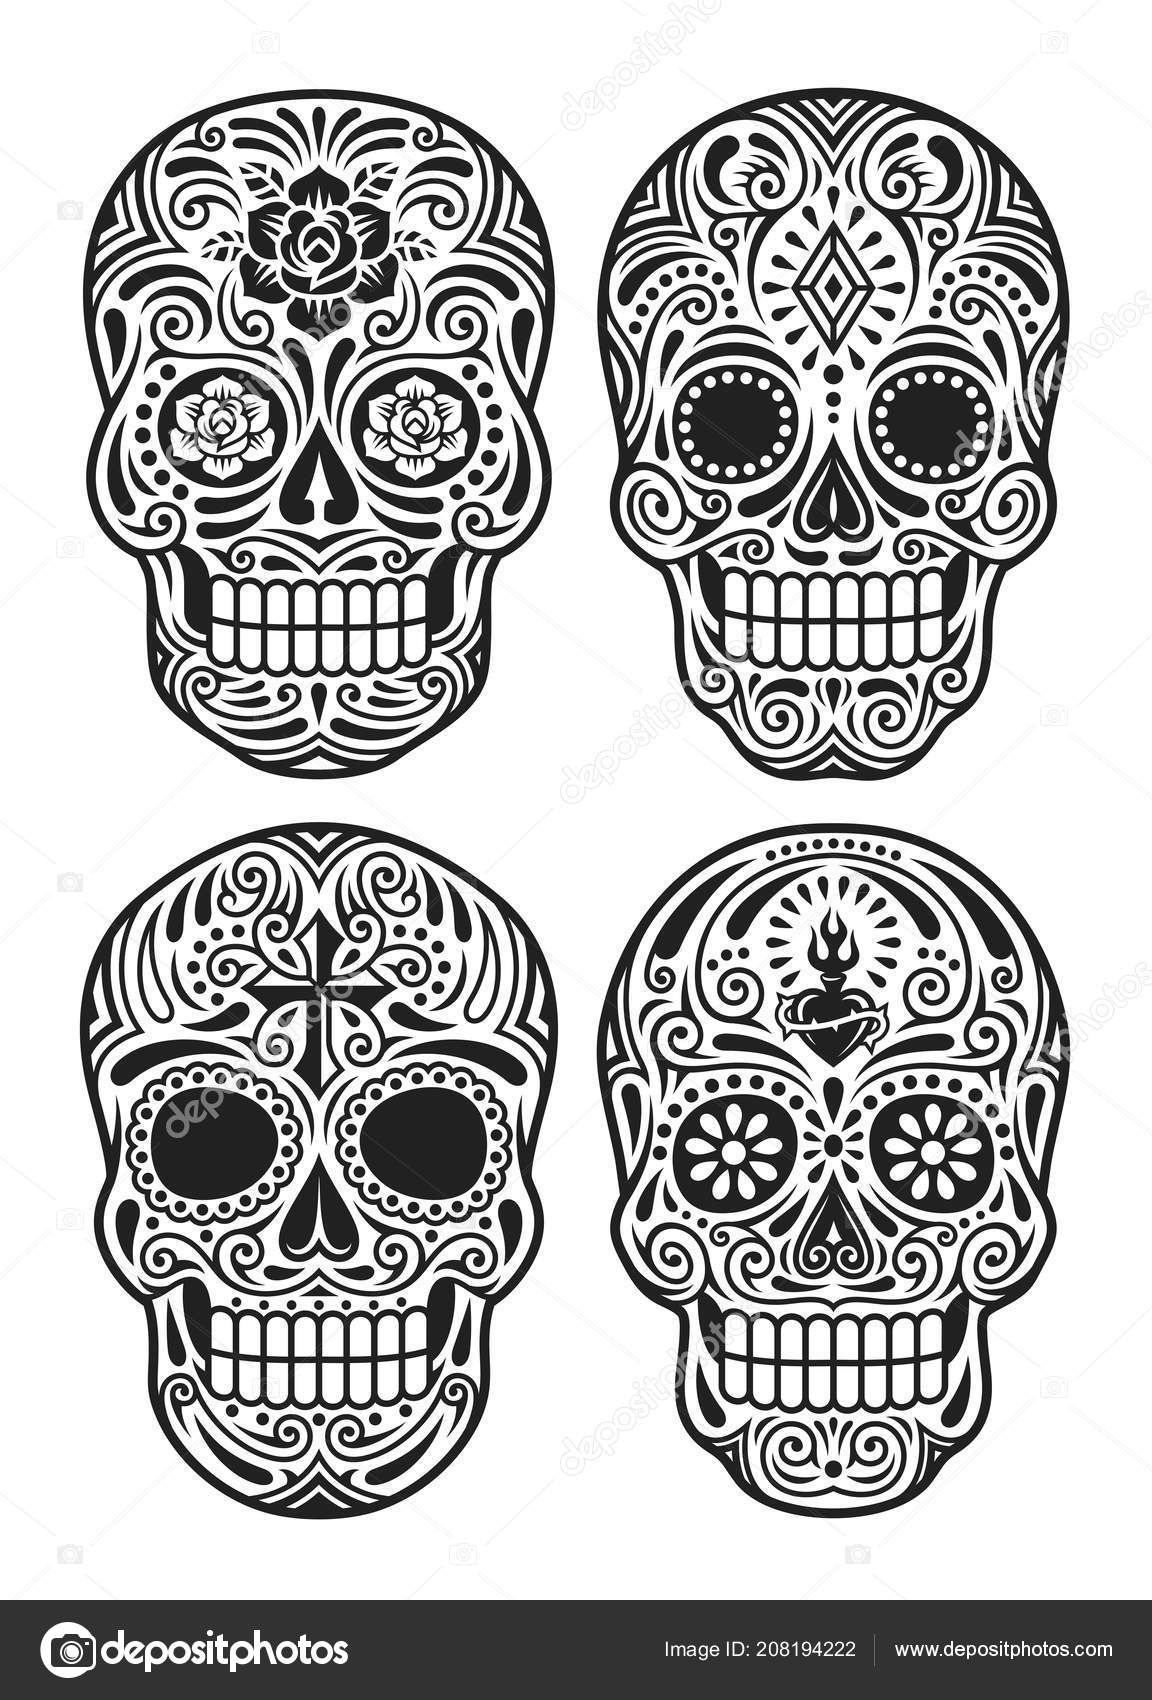 Day of the dead clip art black and white.